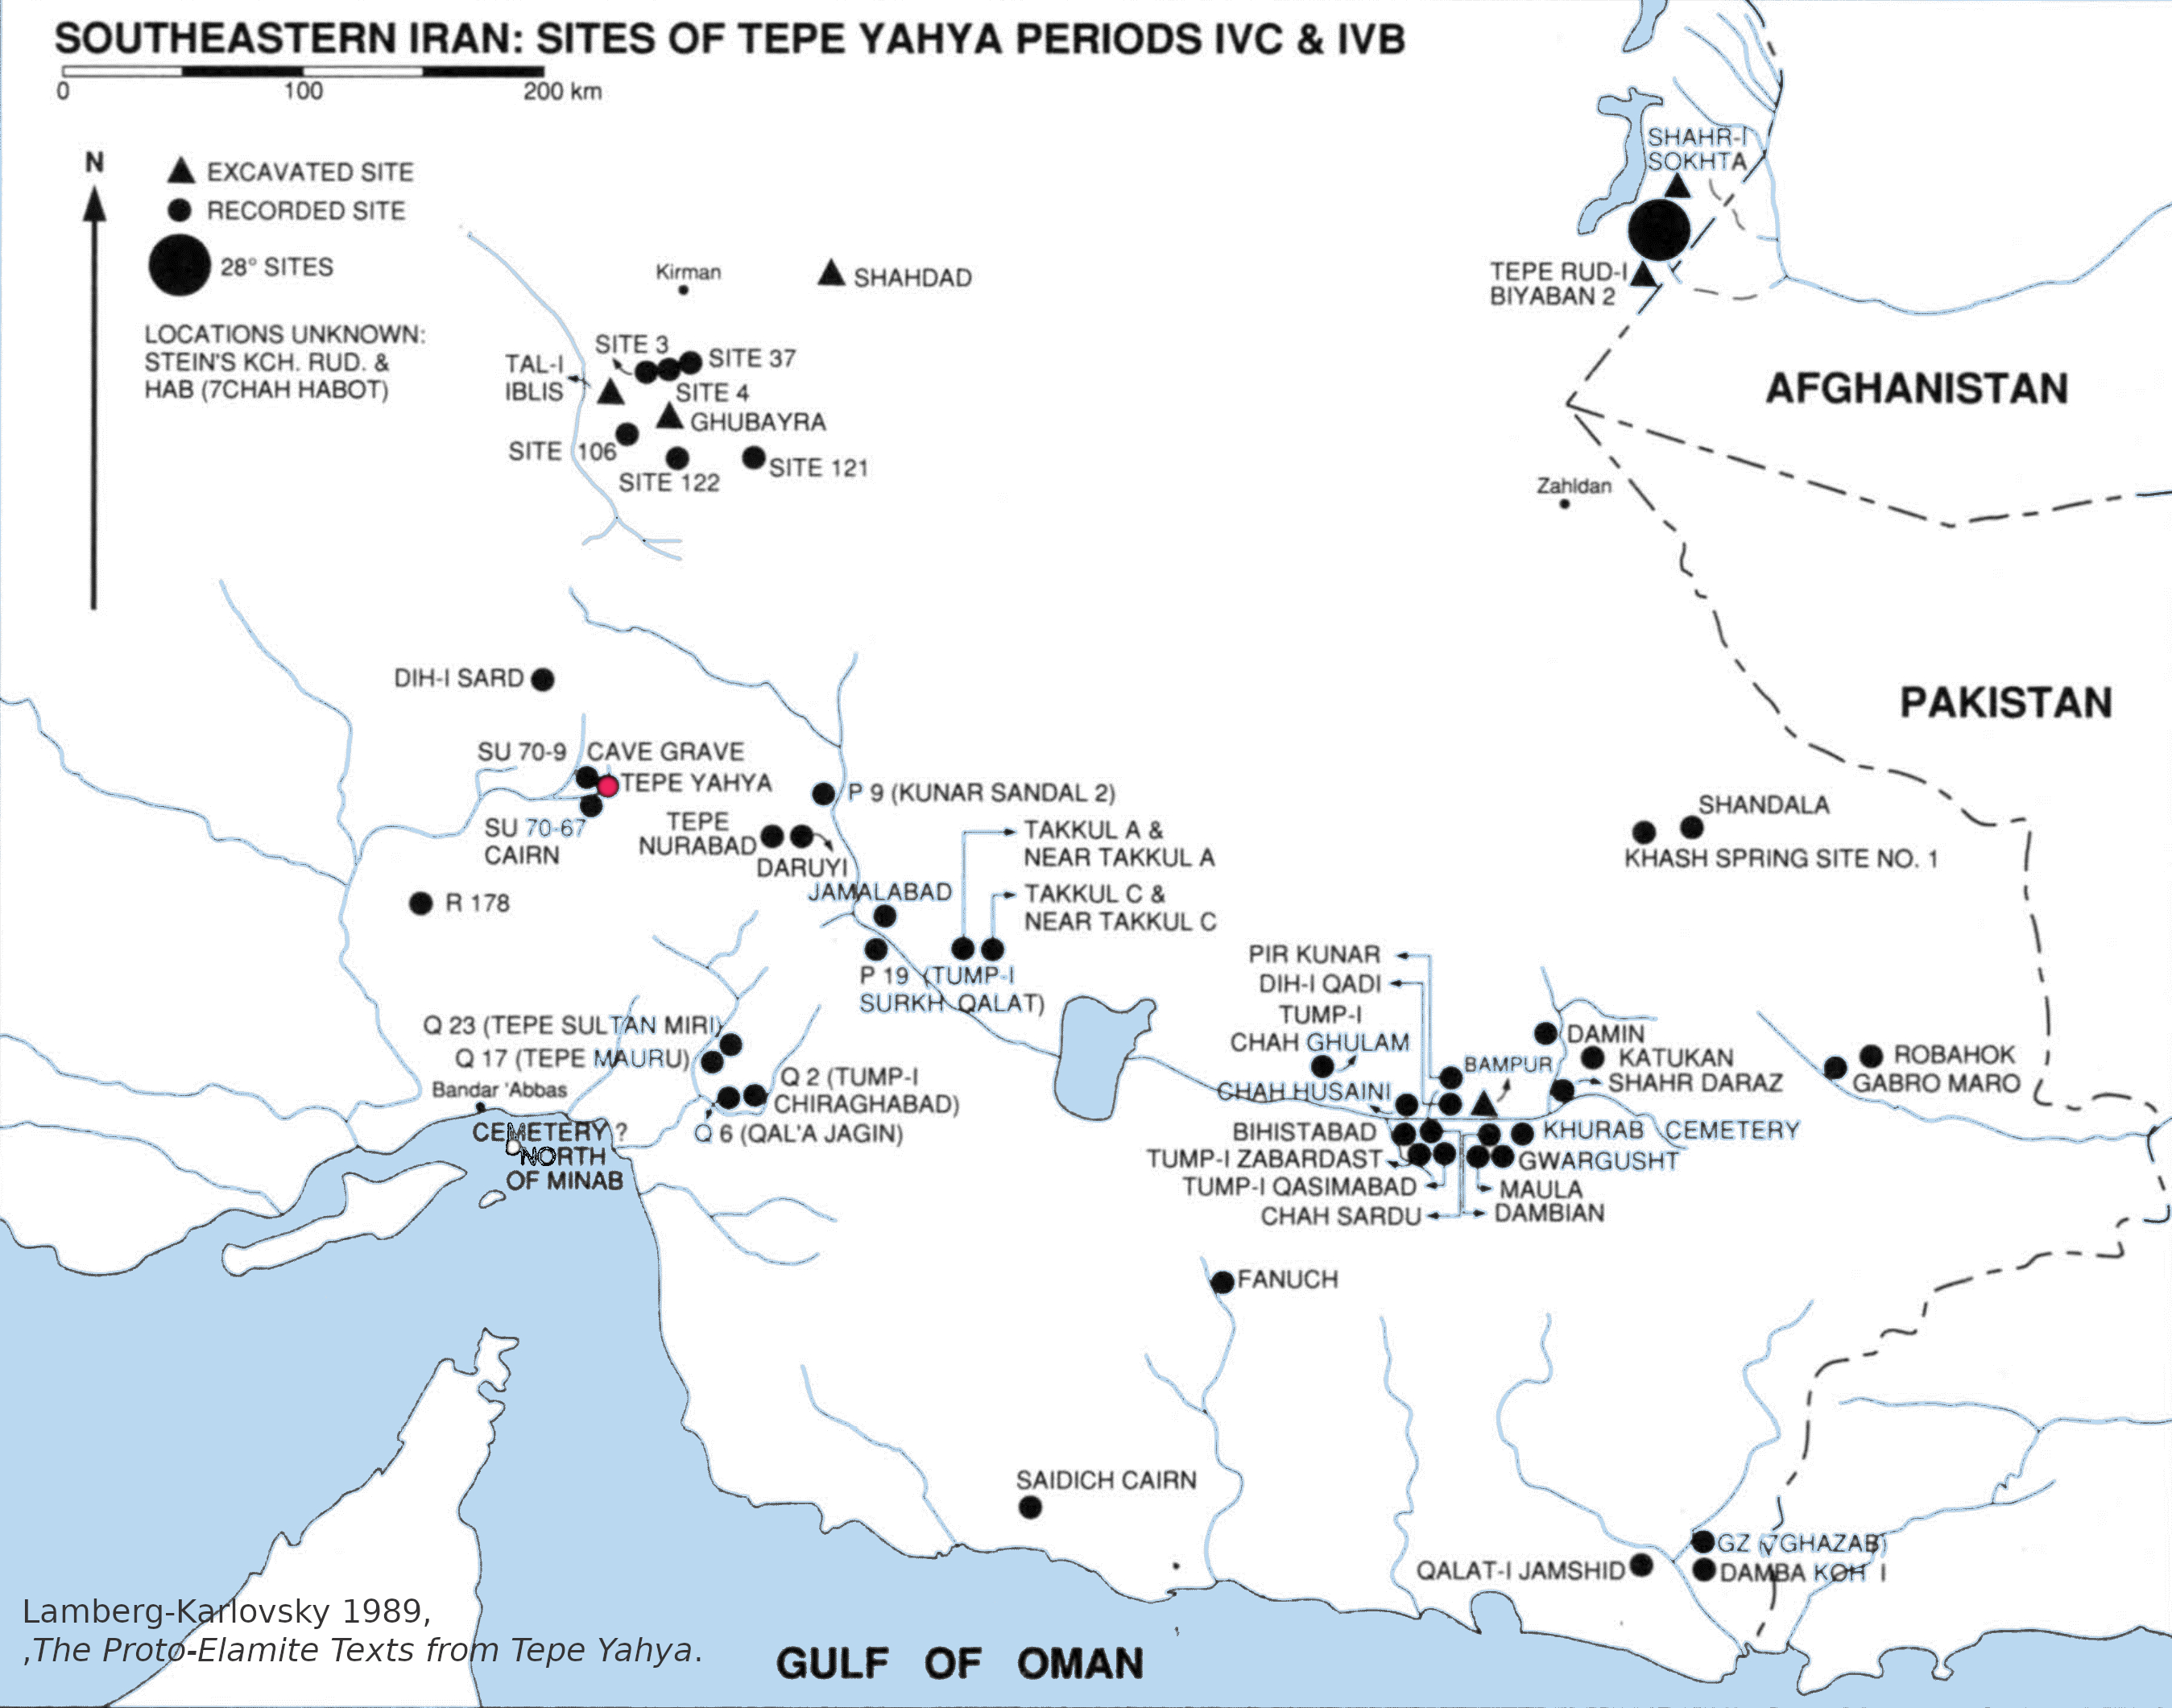 Southern Iran Sites of Tepe Yahya Periods IVC & IVB, Karlovky 1989